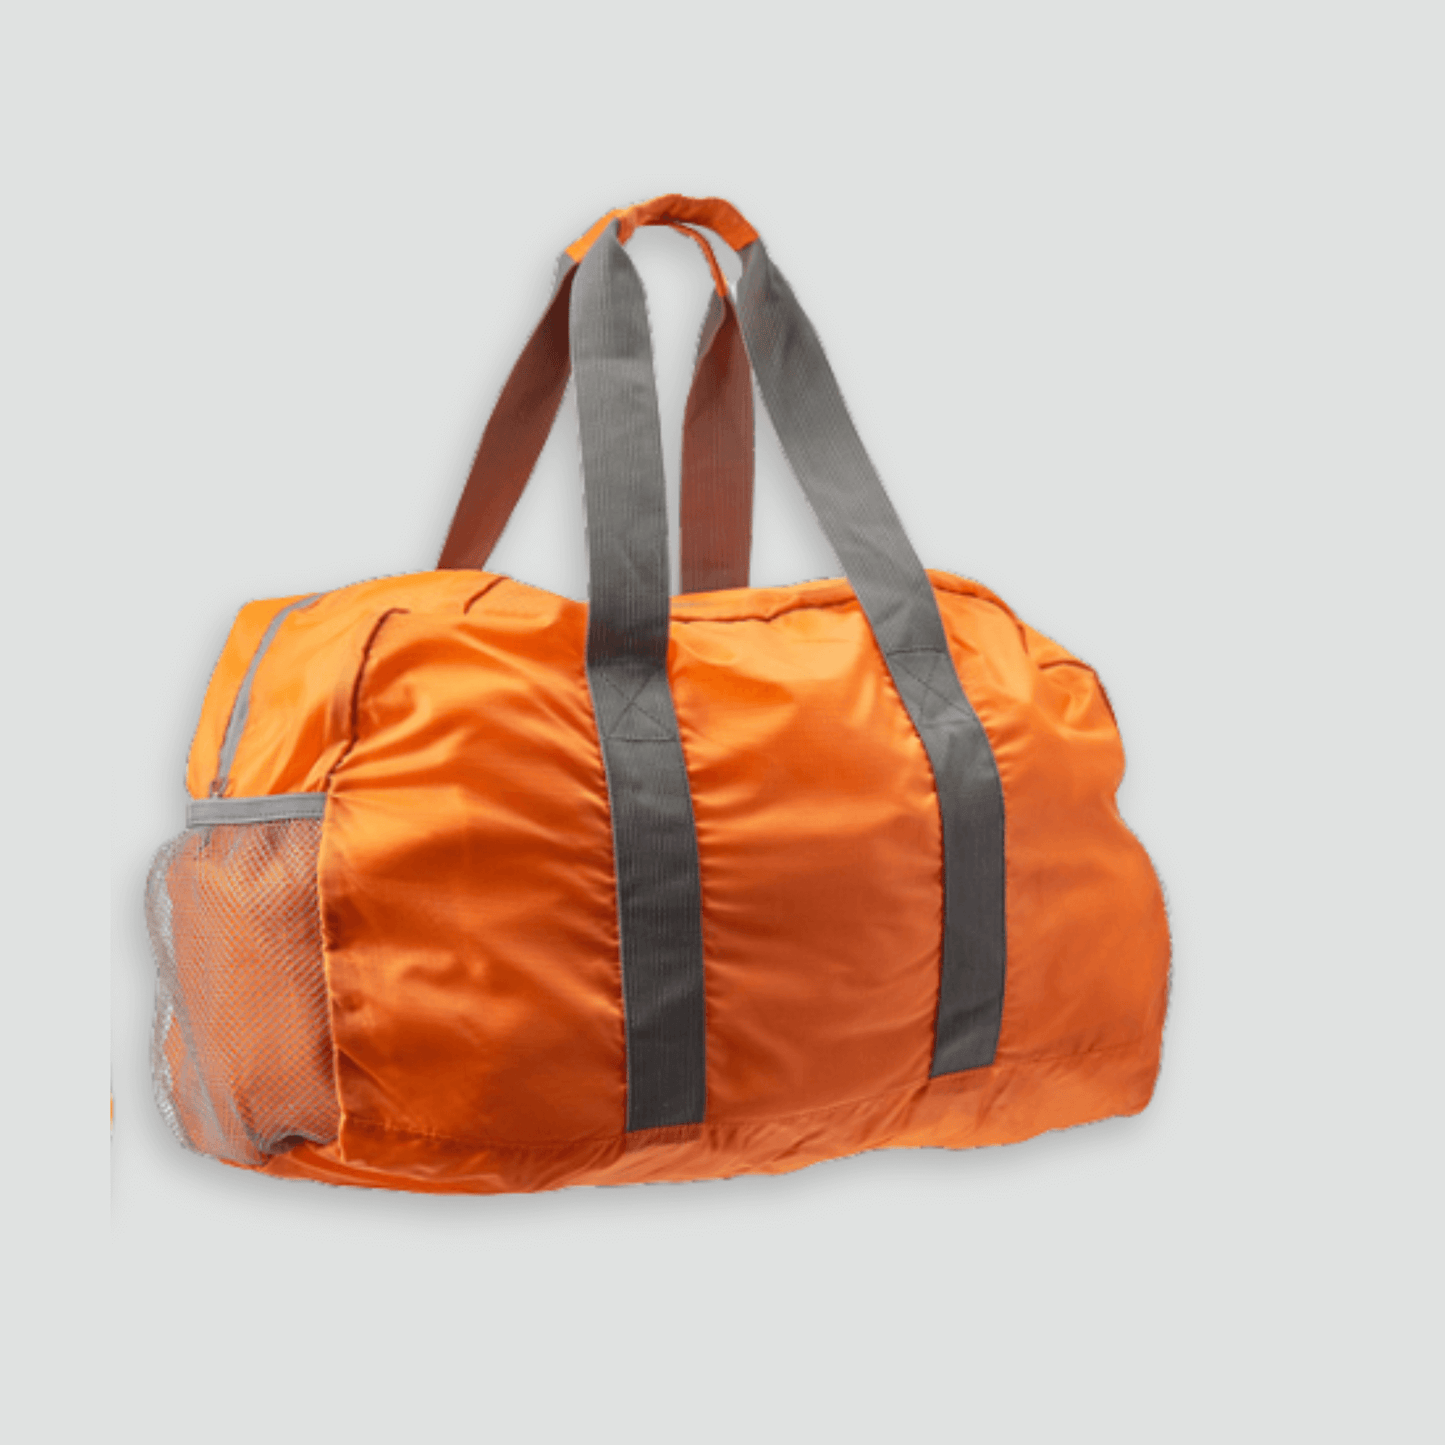 Orange Collapsible Duffle Bag for outdoors